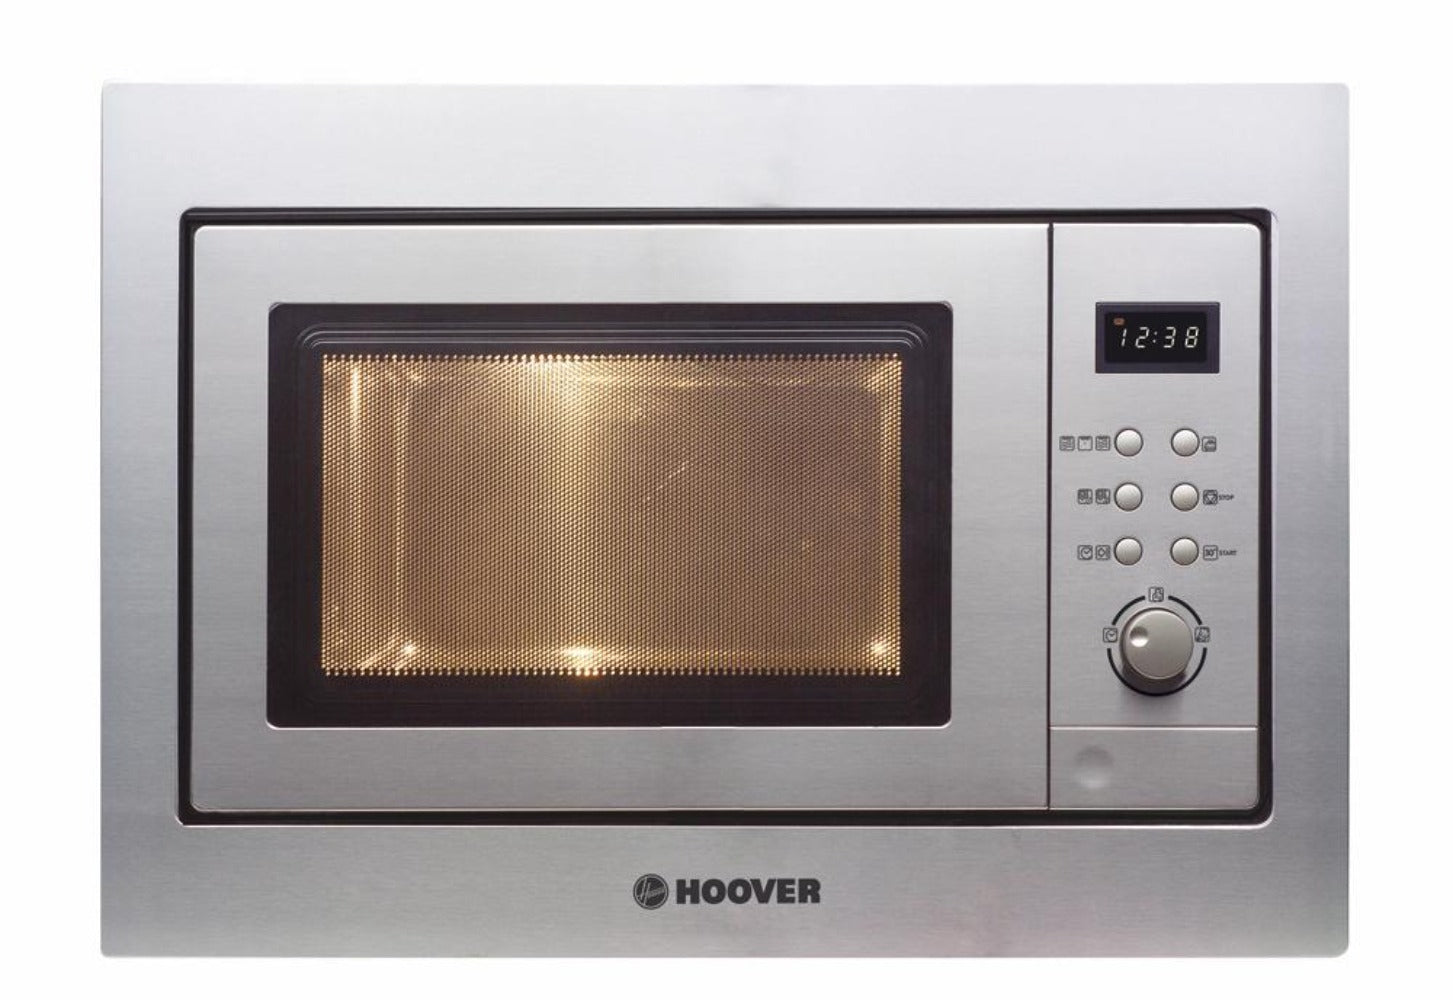 Hoover HMG171X-80 17L BUILT-IN MICROWAVE OVEN AND GRILL - Stainless Steel - Devine Distribution Ltd